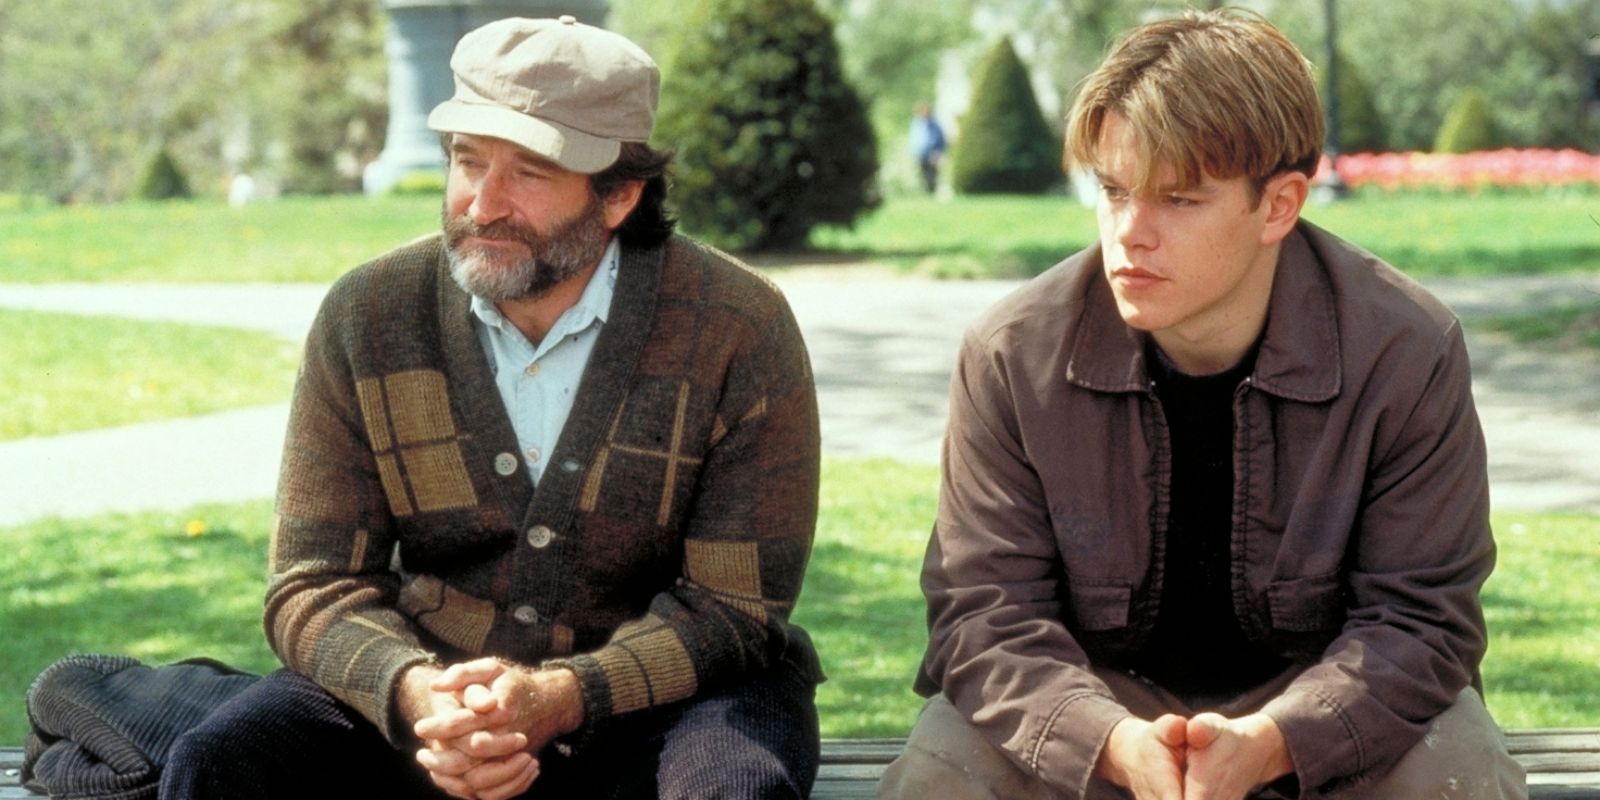 Will and Sean sitting in the park in Good Will Hunting